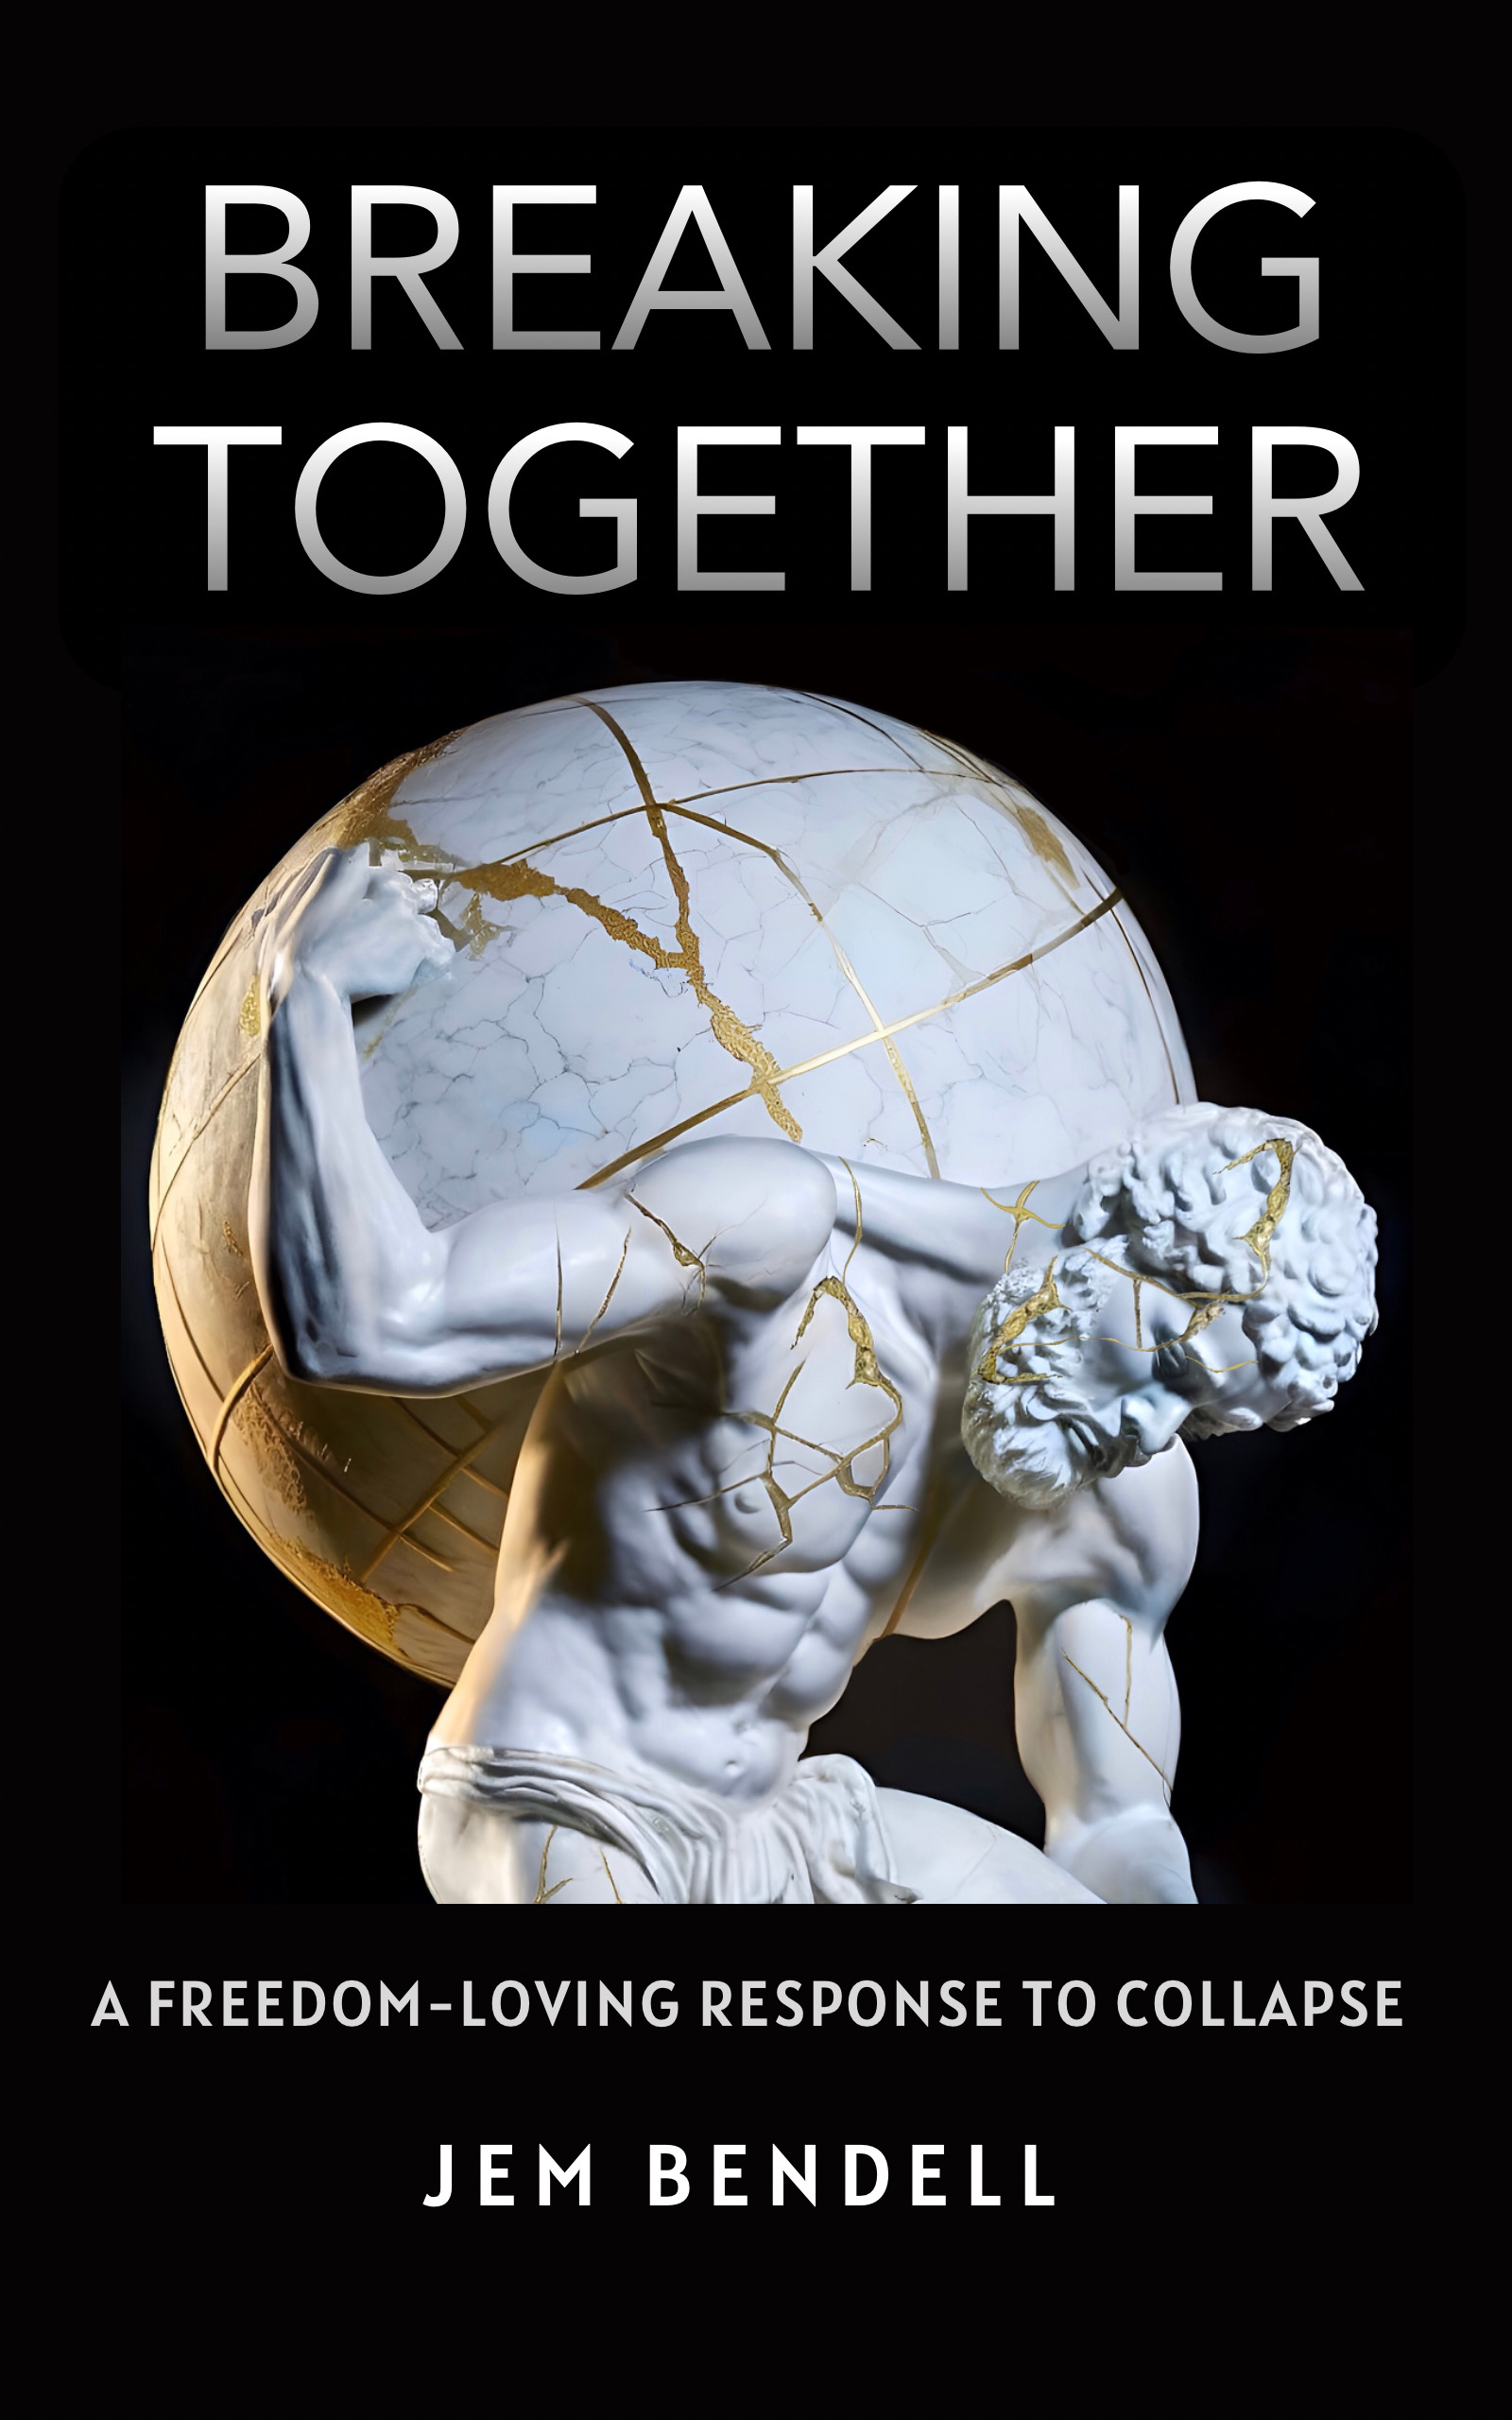 Cover of the book "Breaking Together" by Jem Bendell. A statue of Atlas carrying the world on his back, previously broken and repaired, kintsuge-style, with gold